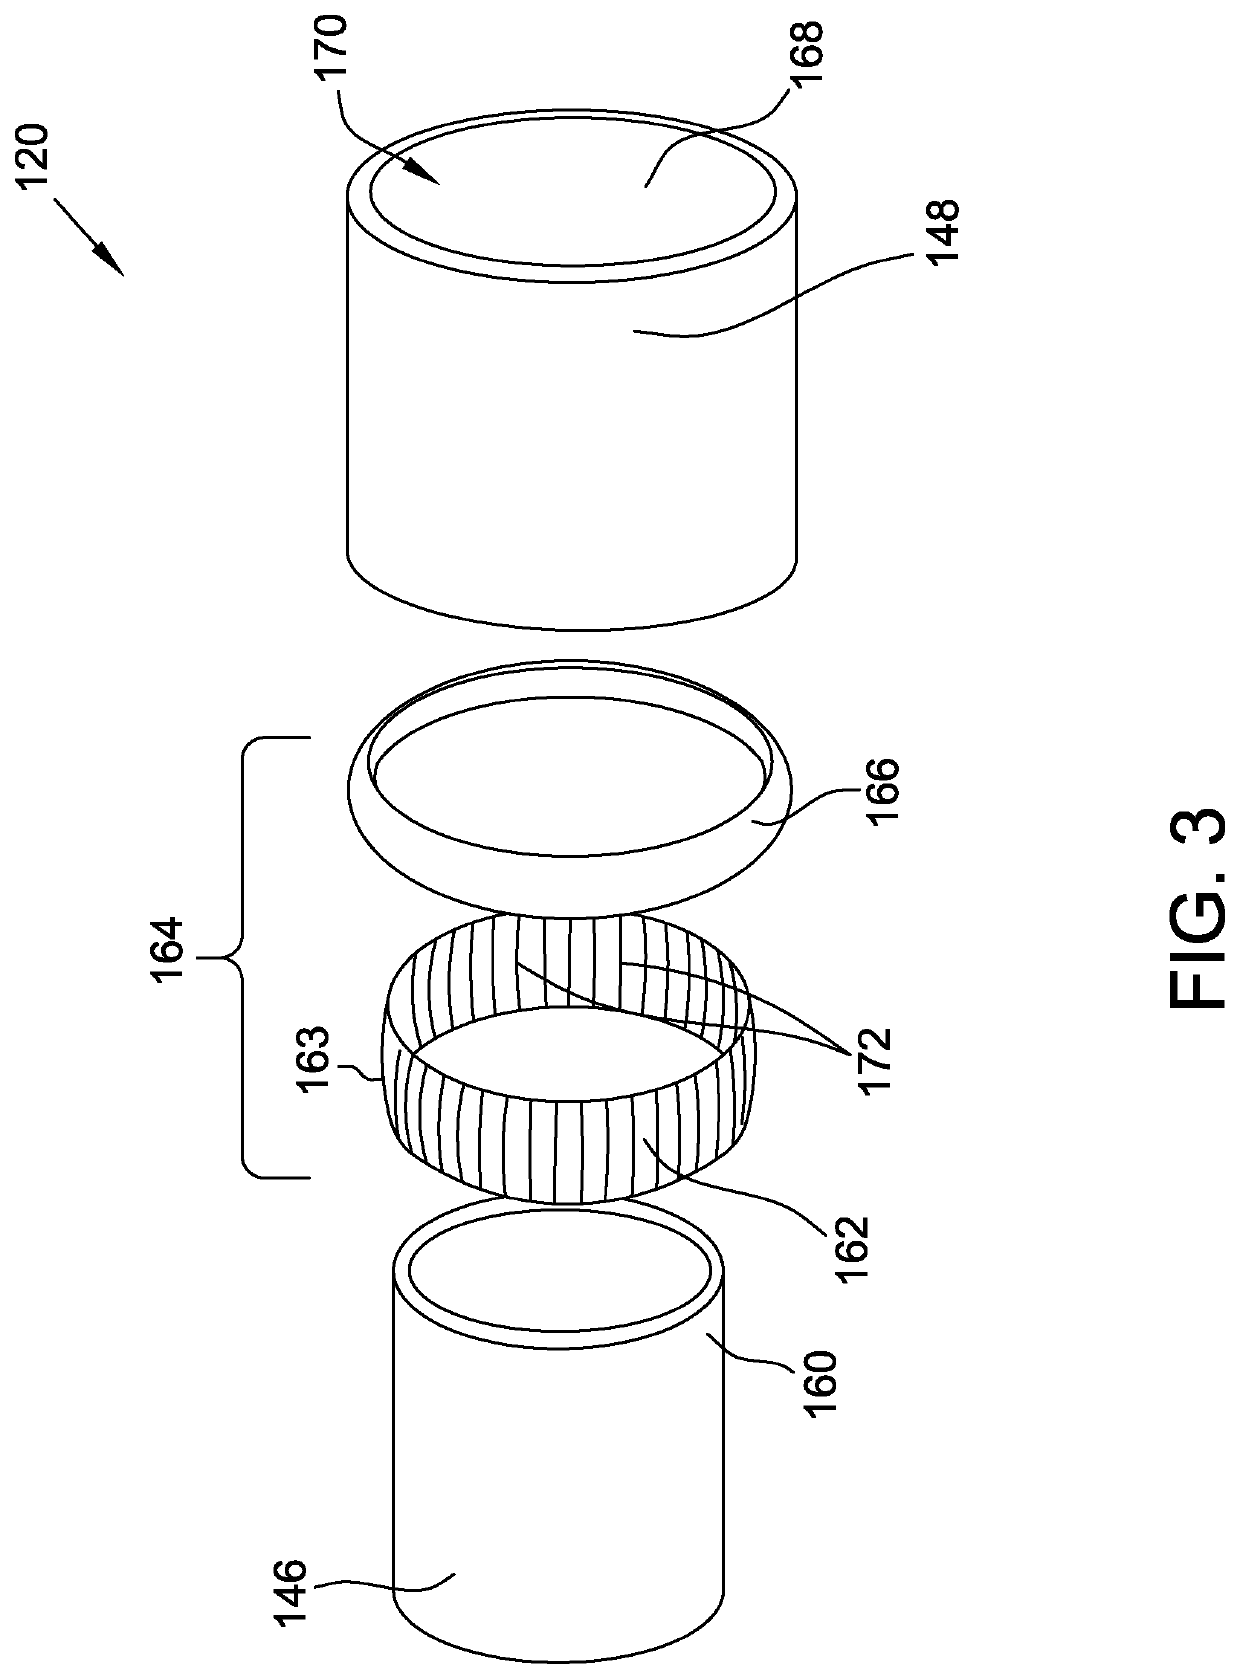 Sleeve assemblies and methods of fabricating same